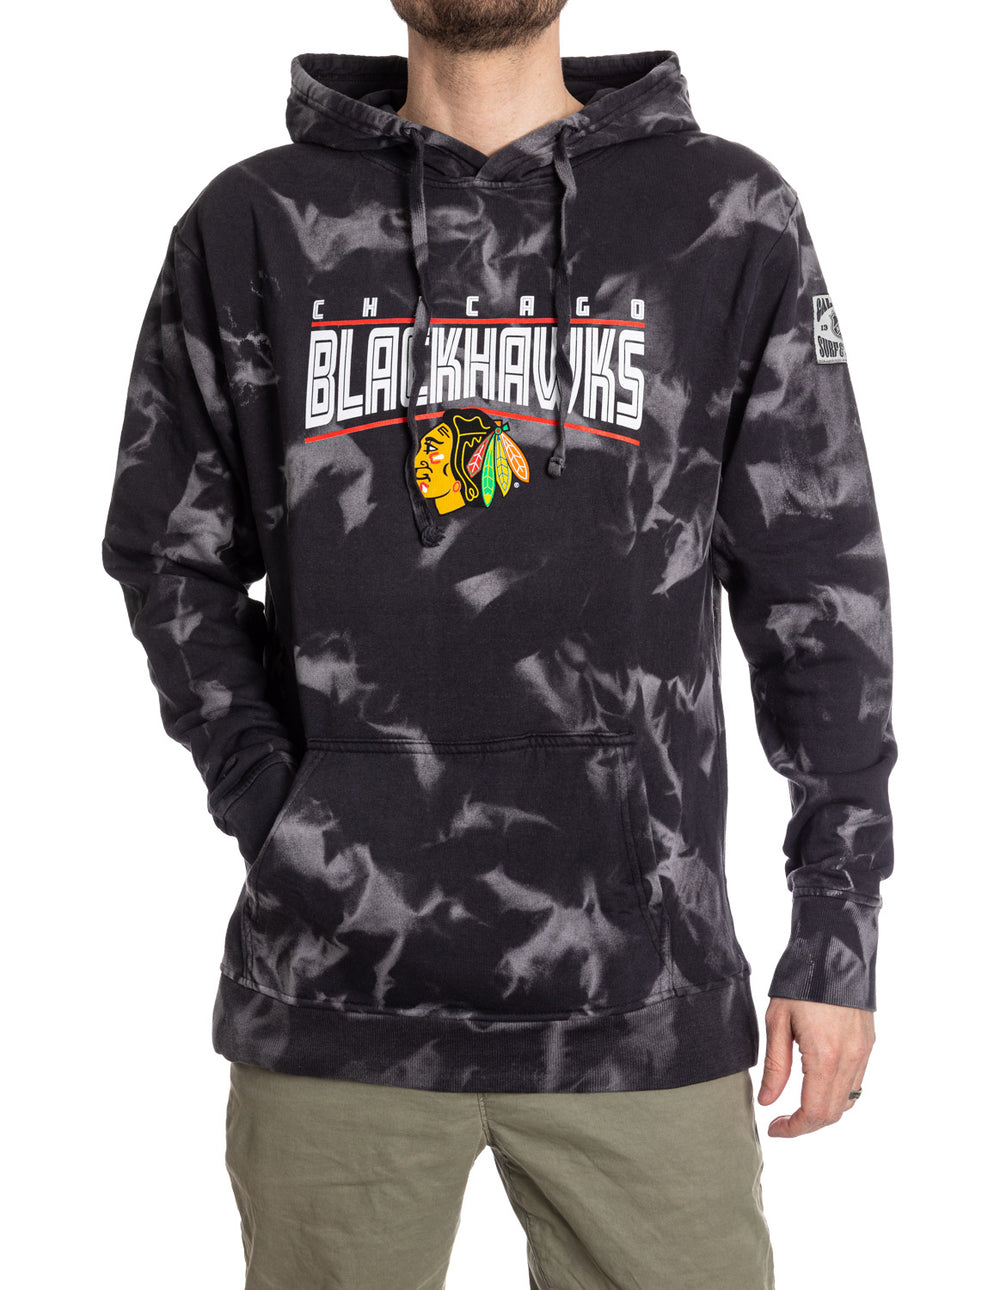 Calhoun NHL Surf & Skate Unisex Crystal Tie Dye Ultra-Soft Pullover Hoodie – The Sunset Collection